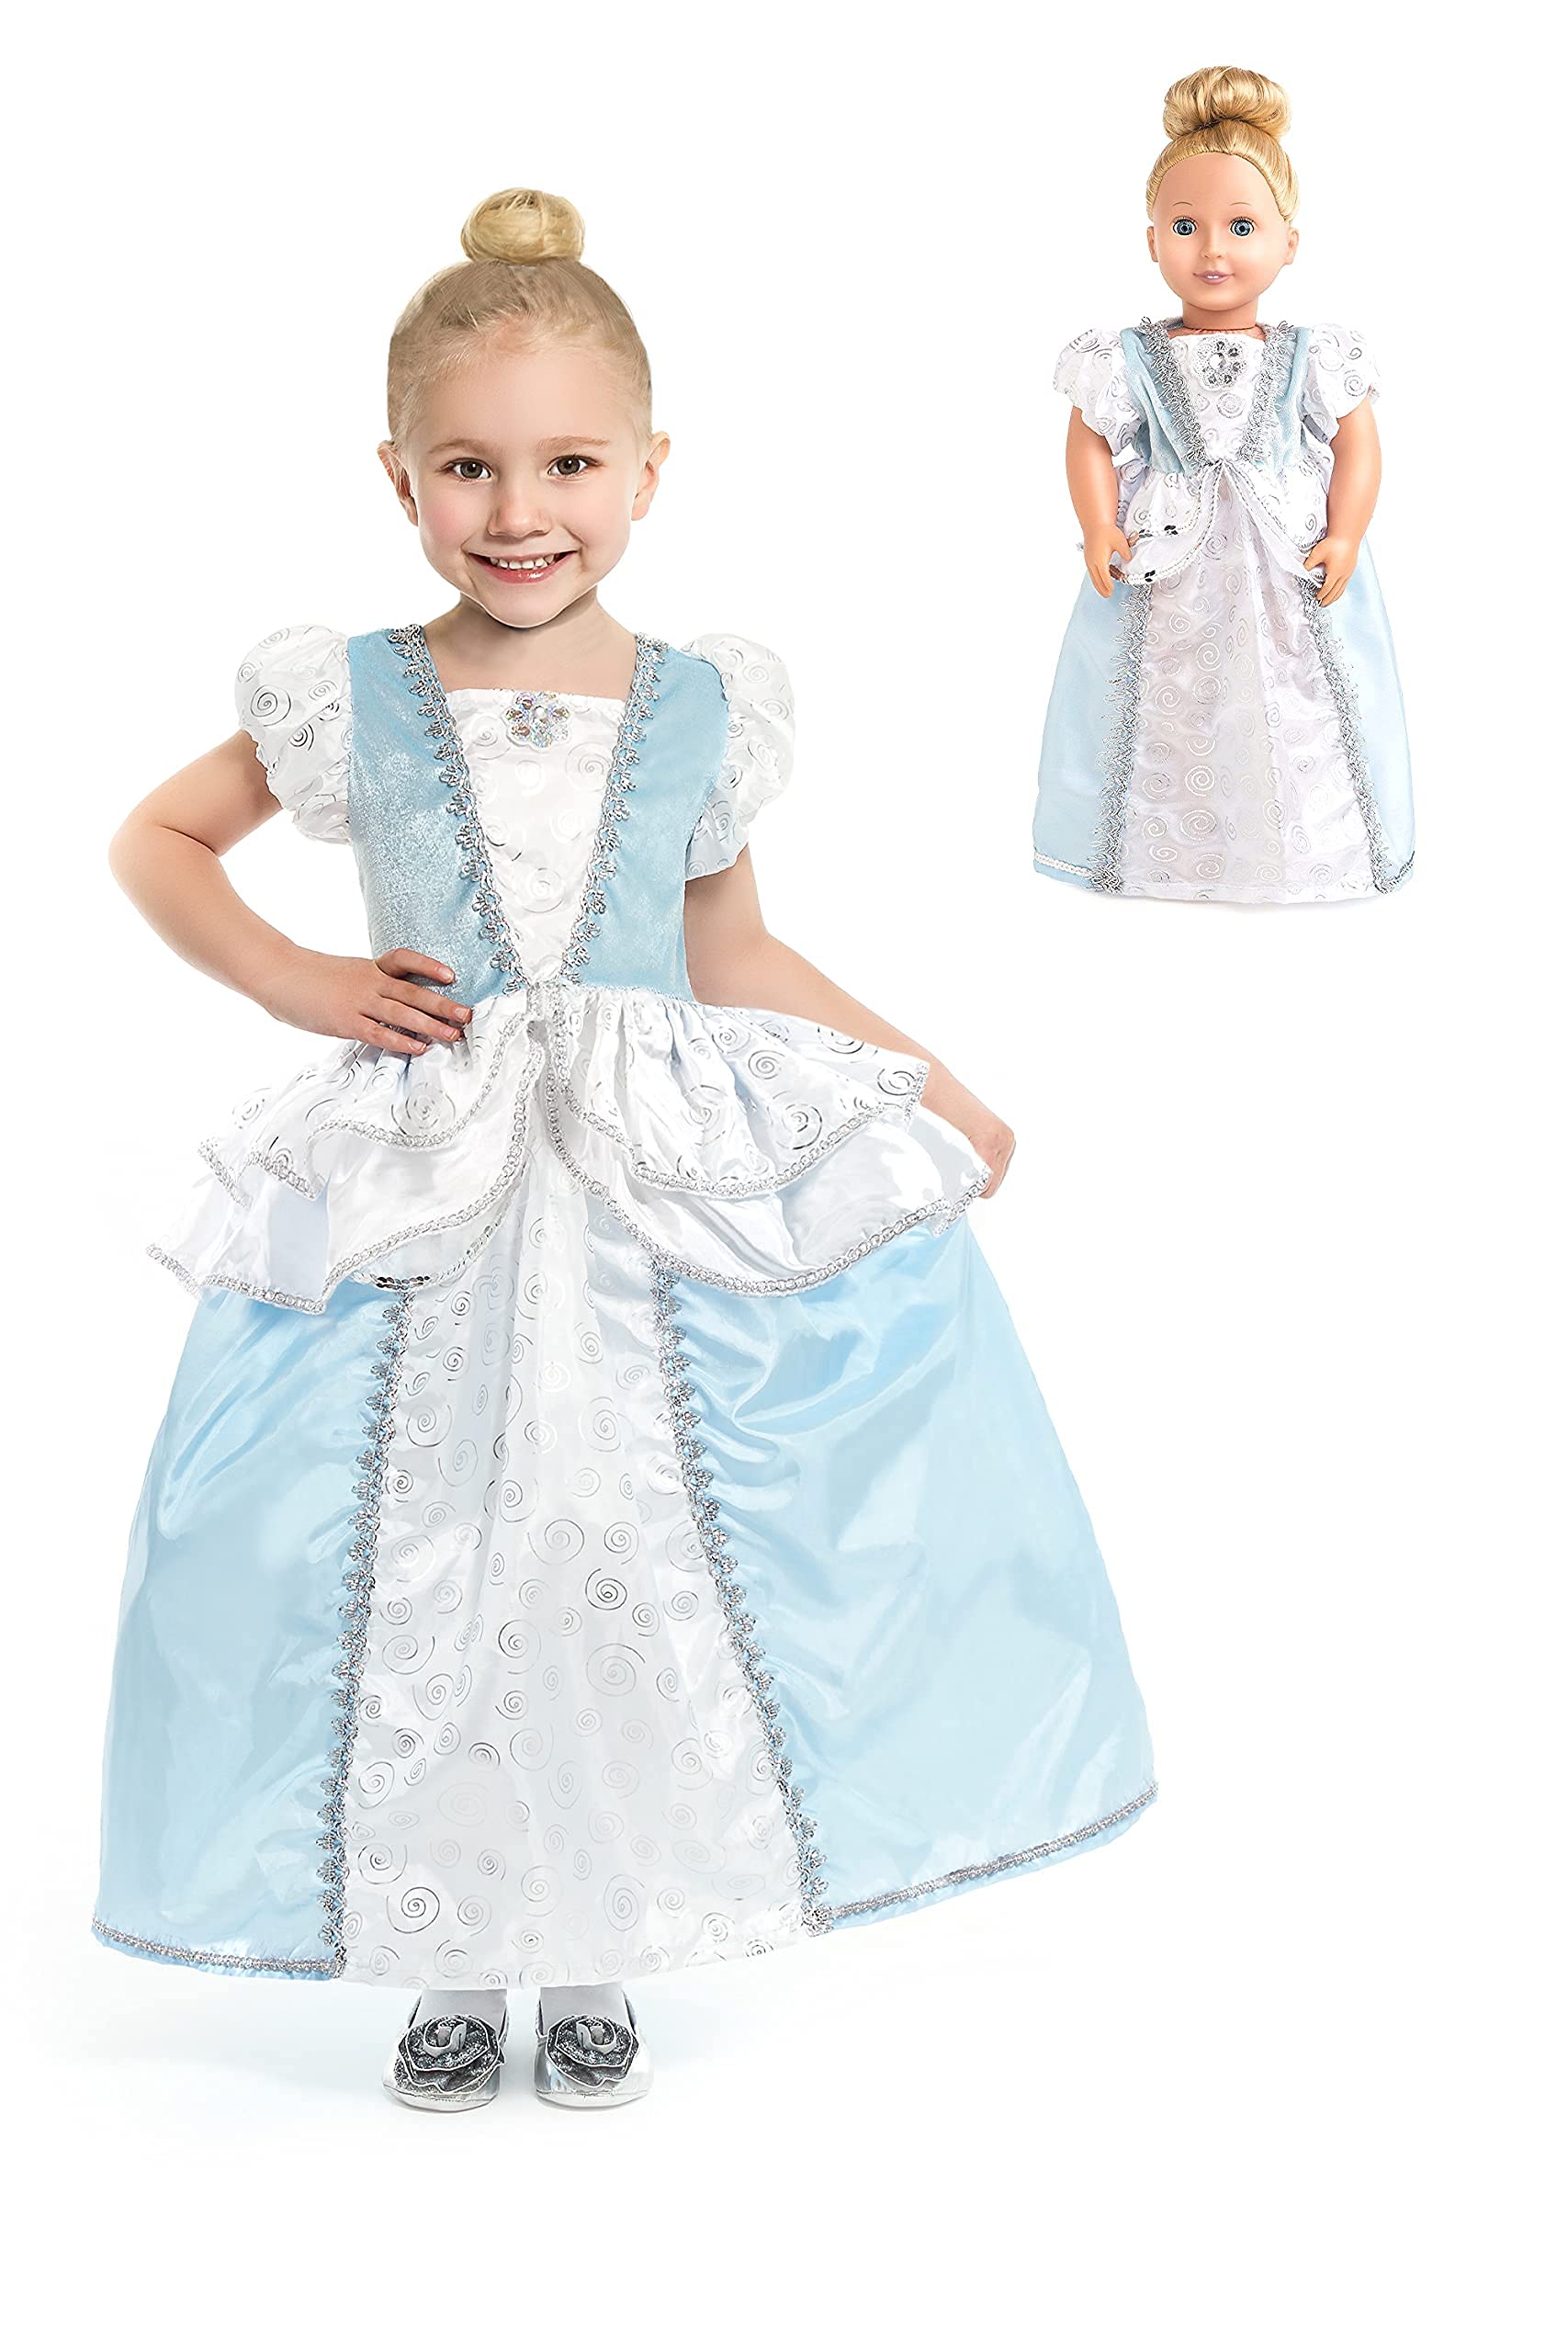 Little Adventures Cinderella Princess Dress Up Costume (Small Age 1-3) with Matching Doll Dress - Machine Washable Child Pretend Play and Party Dress with No Glitter